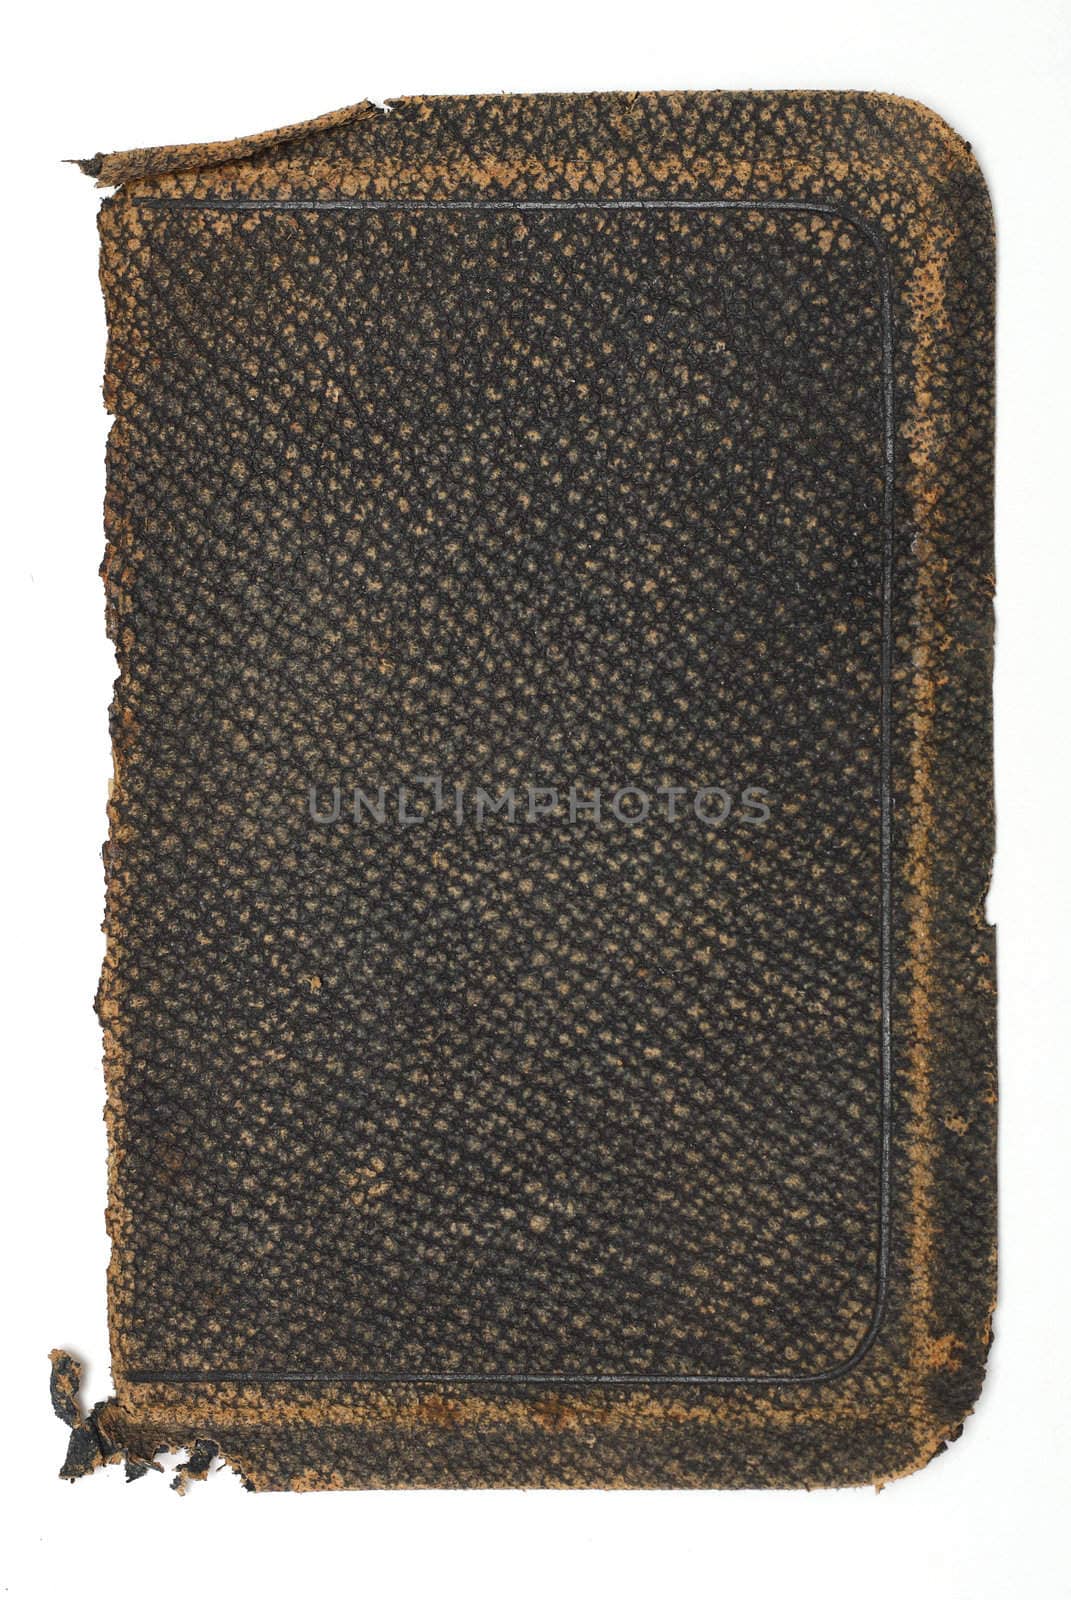 Old Rough Leather Book Cover by Em3